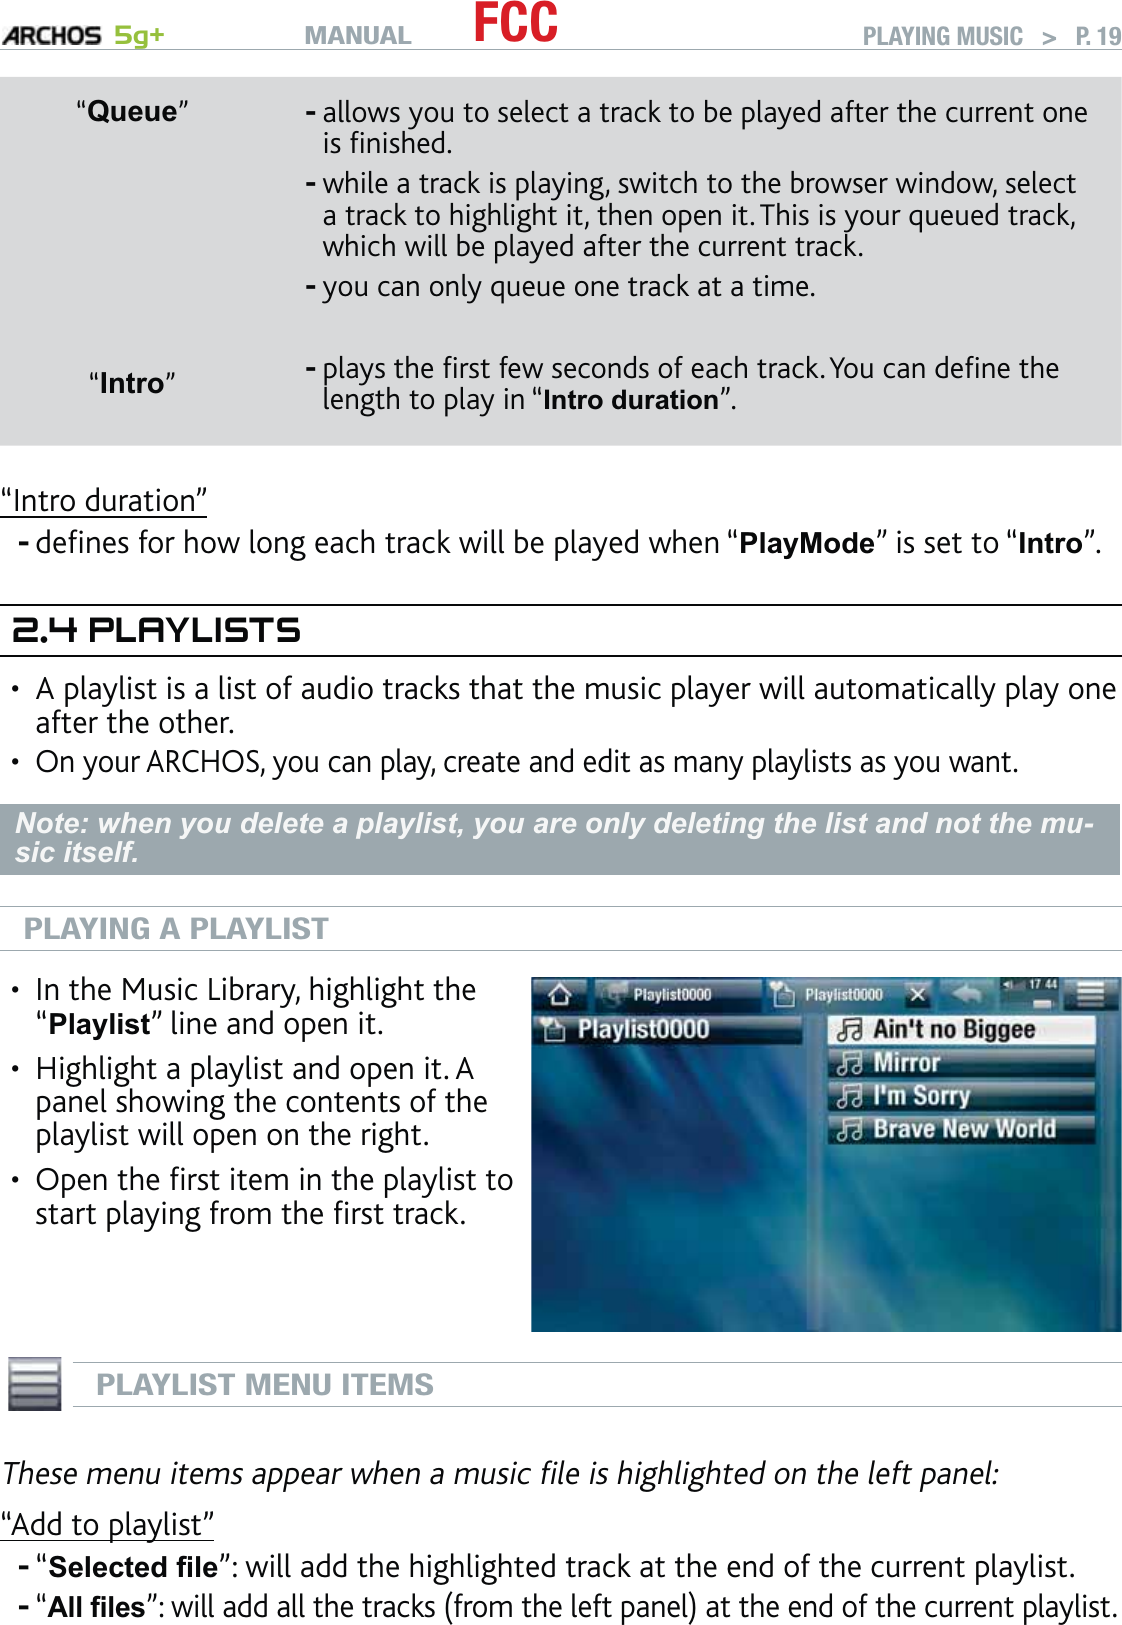 MANUAL 5g+ FCC PLAYING MUSIC   &gt;   P. 19“Queue”allows you to select a track to be played after the current one is ﬁnished.while a track is playing, switch to the browser window, select a track to highlight it, then open it. This is your queued track, which will be played after the current track.you can only queue one track at a time.---“Intro”plays the ﬁrst few seconds of each track. You can deﬁne the length to play in “Intro duration”. -“Intro duration”deﬁnes for how long each track will be played when “PlayMode” is set to “Intro”.2.4 PLAYLISTSA playlist is a list of audio tracks that the music player will automatically play one after the other.On your ARCHOS, you can play, create and edit as many playlists as you want.Note: when you delete a playlist, you are only deleting the list and not the mu-sic itself.PLAYING A PLAYLISTIn the Music Library, highlight the “Playlist” line and open it.Highlight a playlist and open it. A panel showing the contents of the playlist will open on the right.Open the ﬁrst item in the playlist to start playing from the ﬁrst track.•••PLAYLIST MENU ITEMSThese menu items appear when a music ﬁle is highlighted on the left panel:“Add to playlist”“Selected ﬁle”: will add the highlighted track at the end of the current playlist.“All ﬁles”: will add all the tracks (from the left panel) at the end of the current playlist.-••--